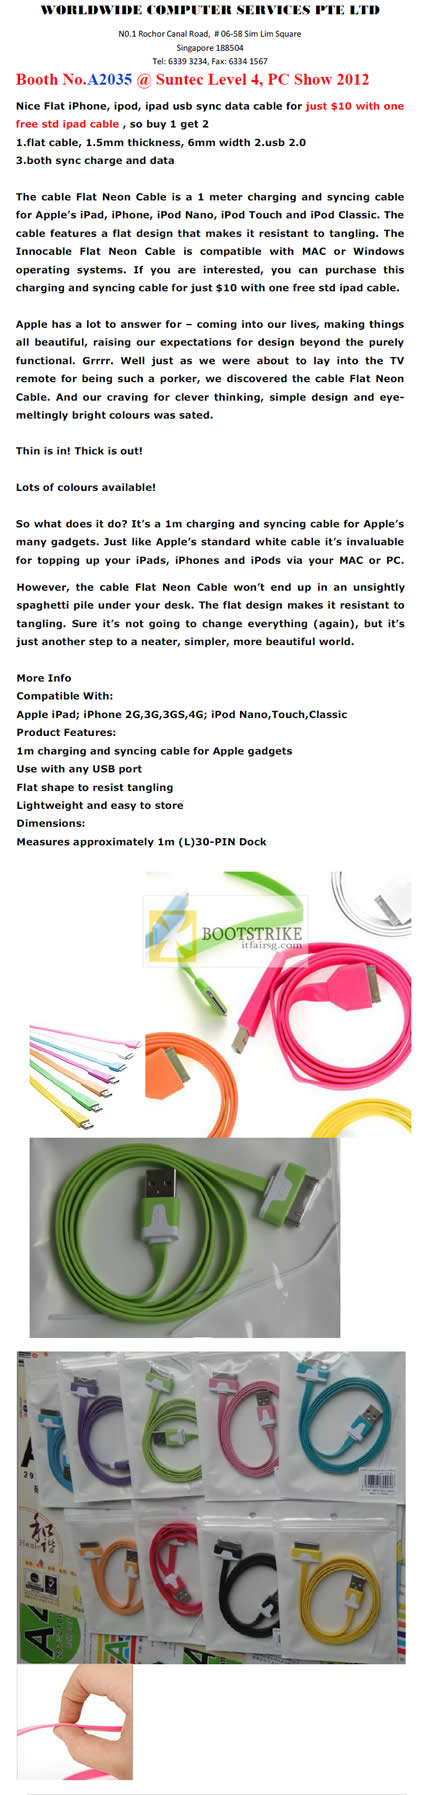 PC SHOW 2012 price list image brochure of Worldwide Computer Flat IPhone IPod IPad USB Sync Cable